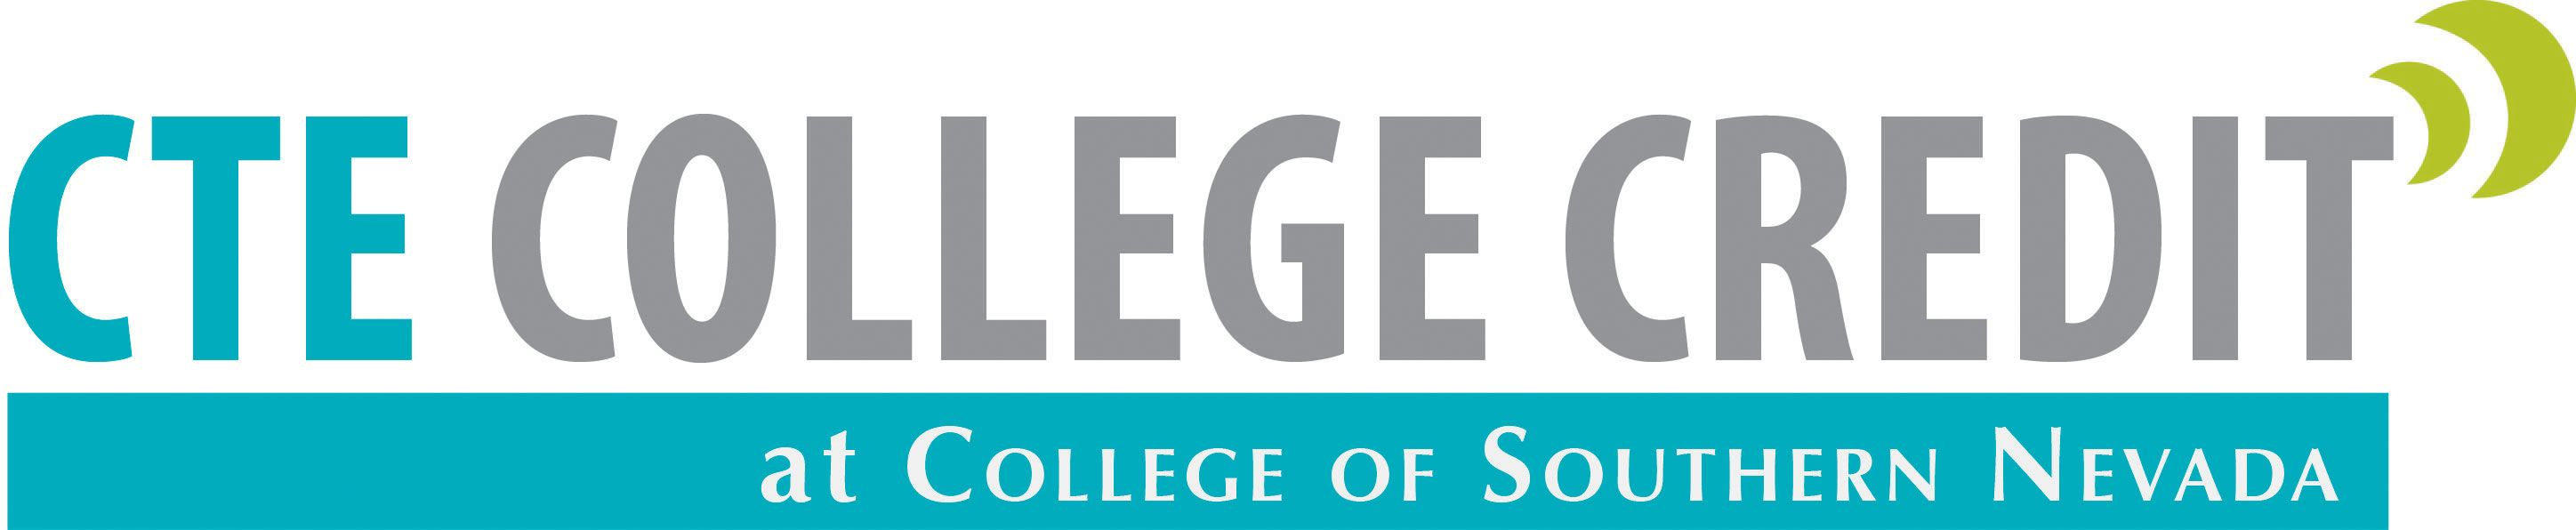 CTE College Credit at College of Southern Nevada